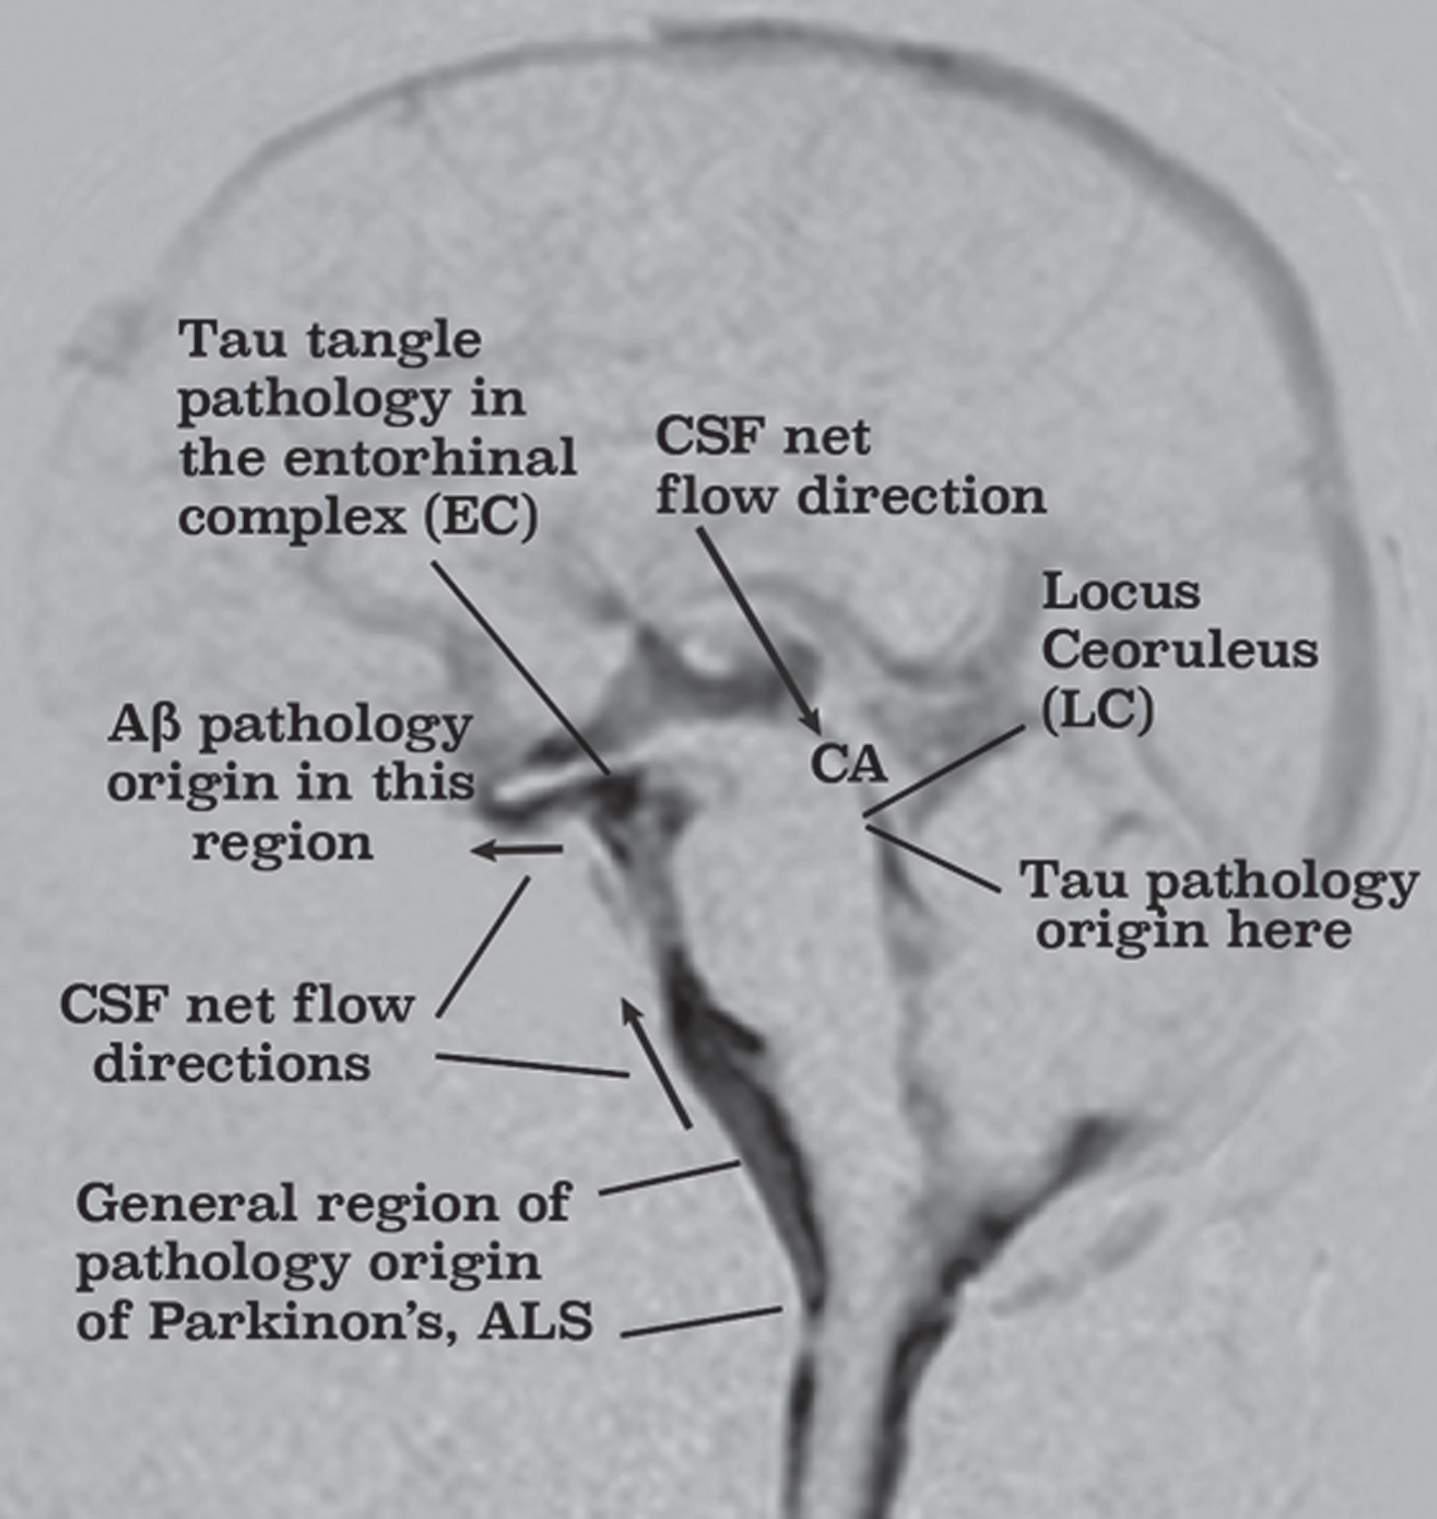 Origins of Aβ and tau AD pathology correlates with black areas revealing regions in which CSF motion is either chaotic and/or flowing from a chaotic flow region. Parkinson’s and ALS pathology also originate in the lower brainstem region where motor nerves jut into chaotic CSF. Source: [18] Licensed under a Creative Commons Attribution-NonCommercial-NoDerivatives International.